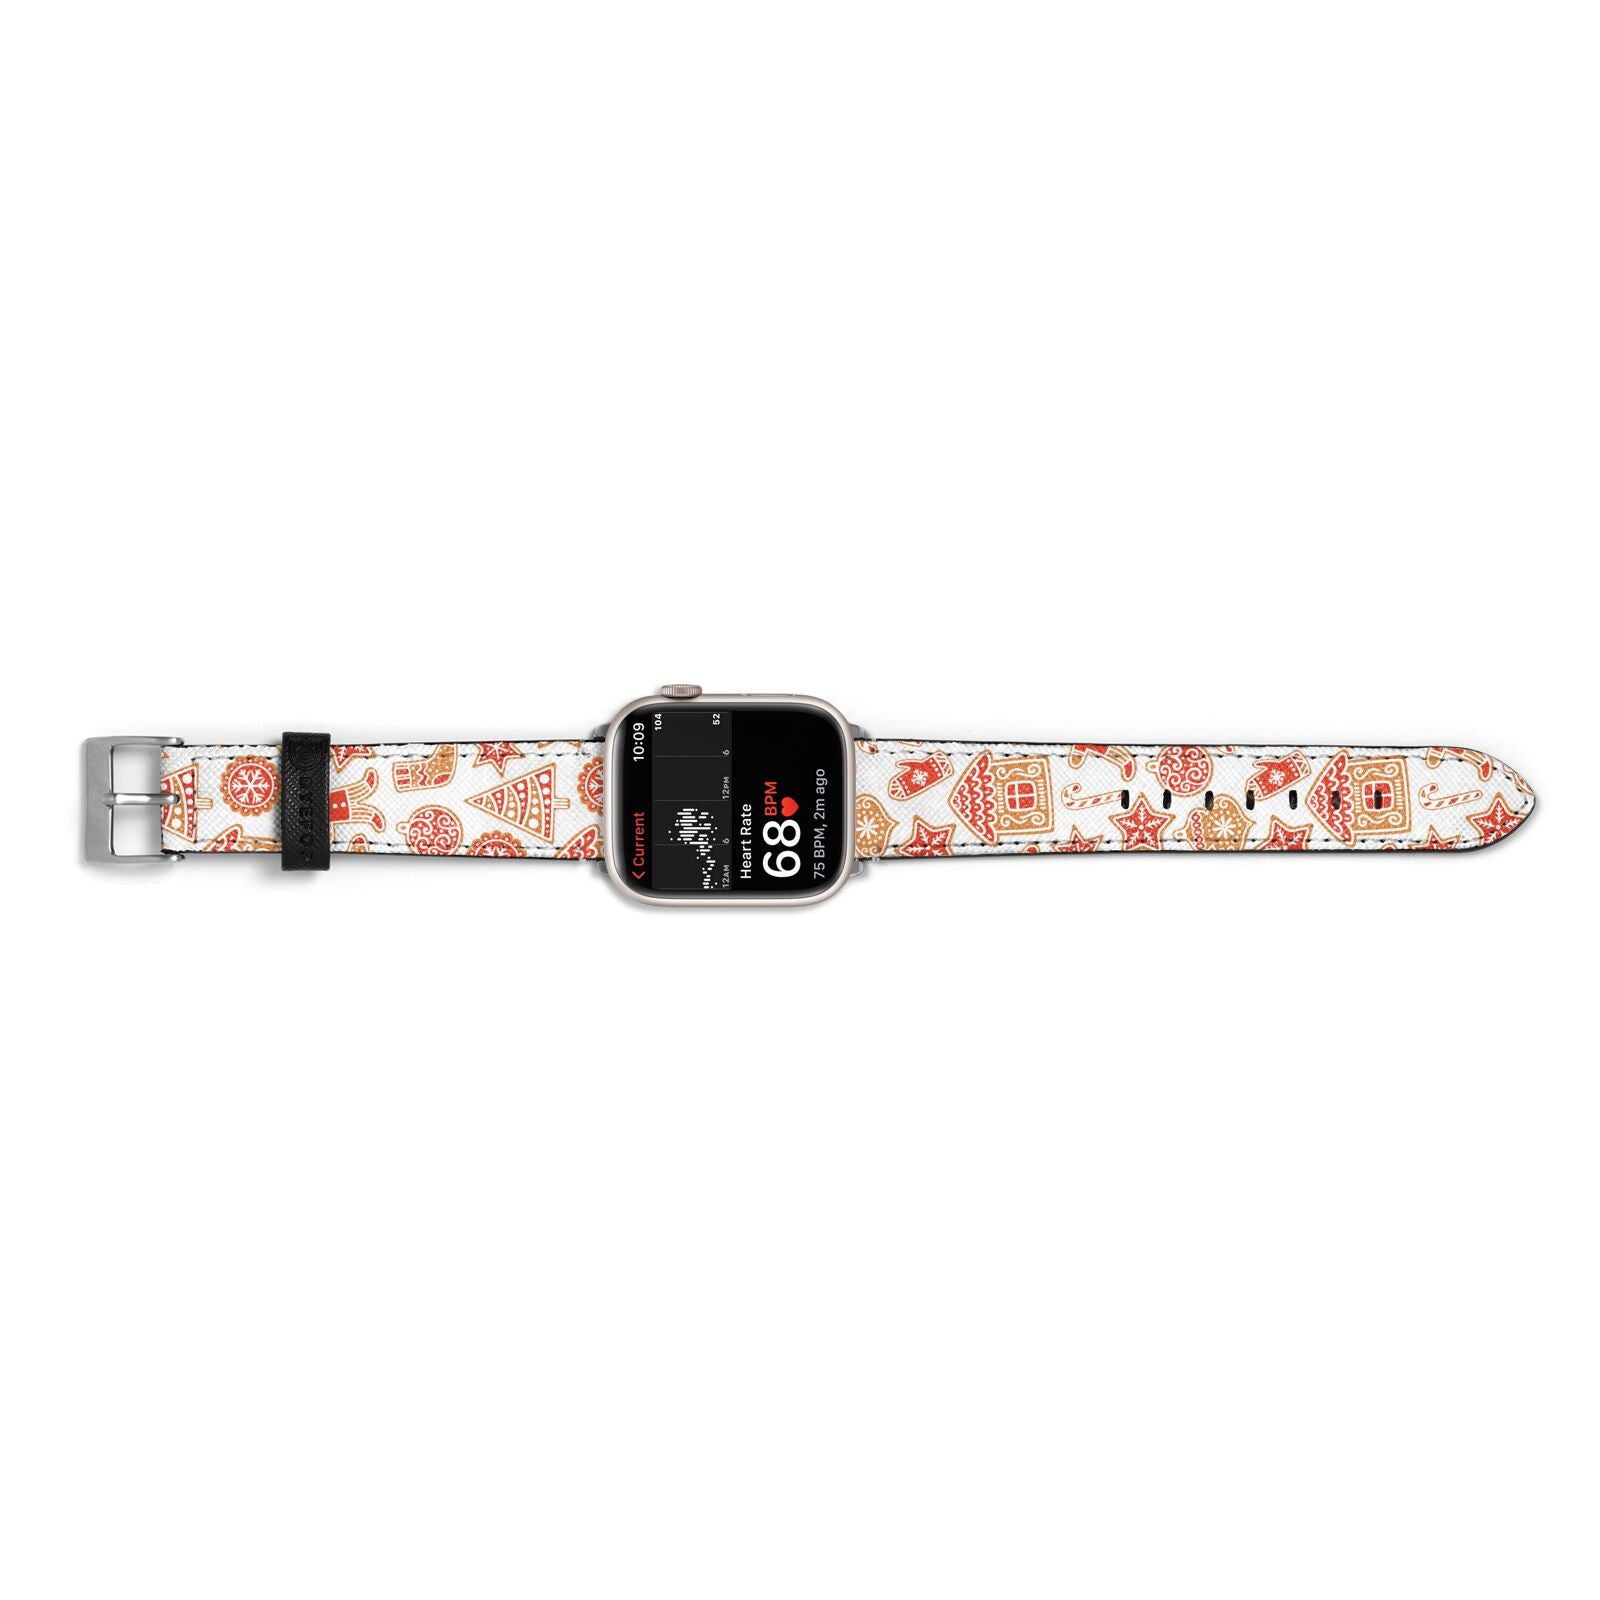 Christmas Gingerbread Apple Watch Strap Size 38mm Landscape Image Silver Hardware